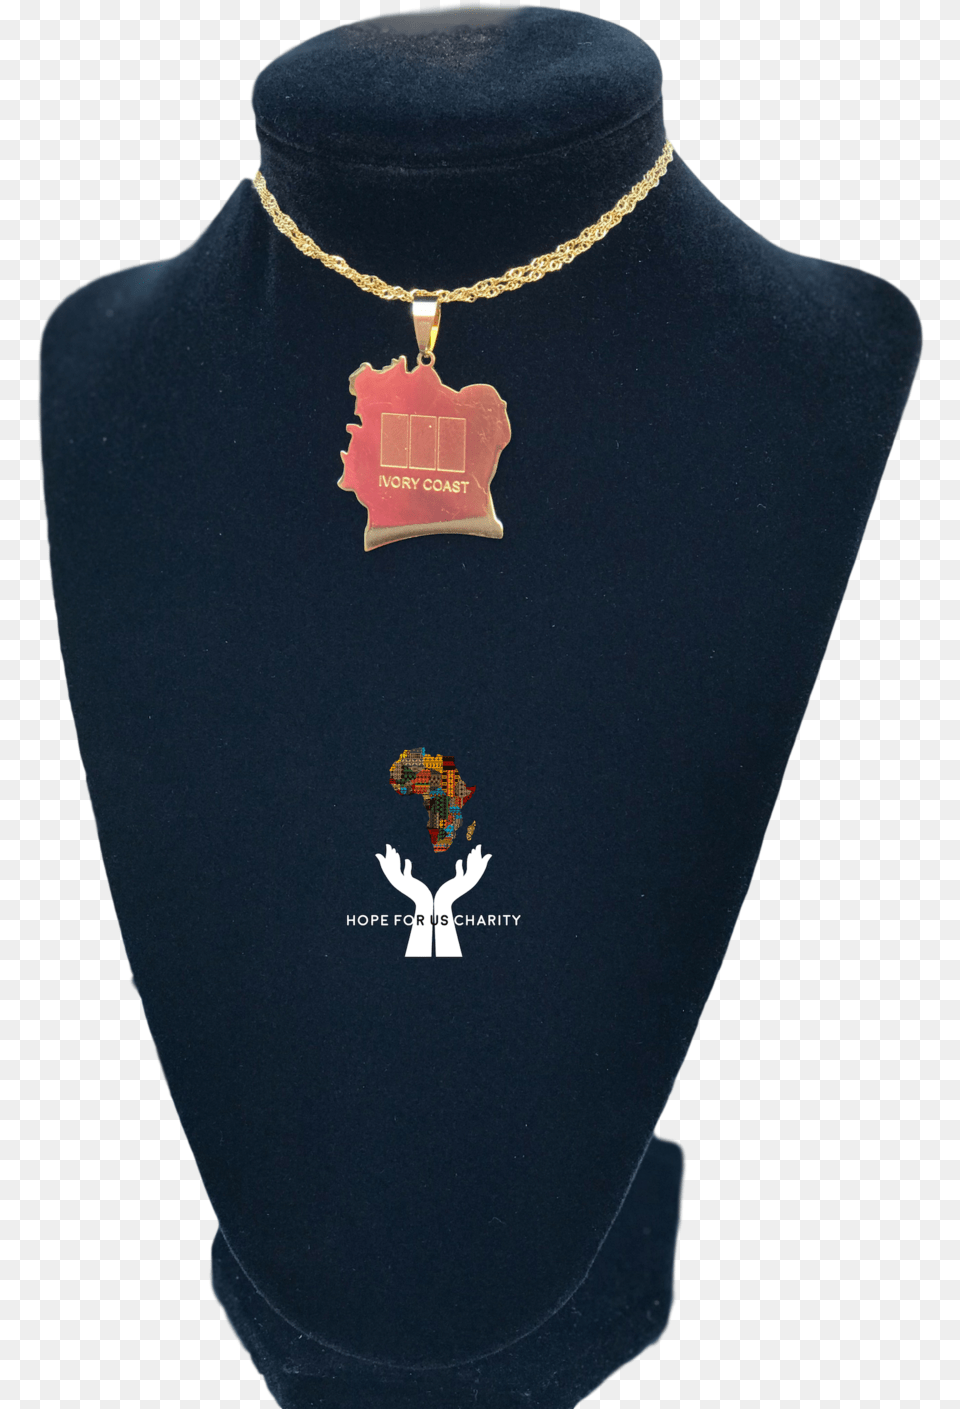 Somalia Necklace U2014 The Hope For Us Charity Gold Chains, Accessories, Pendant, Jewelry, Adult Png